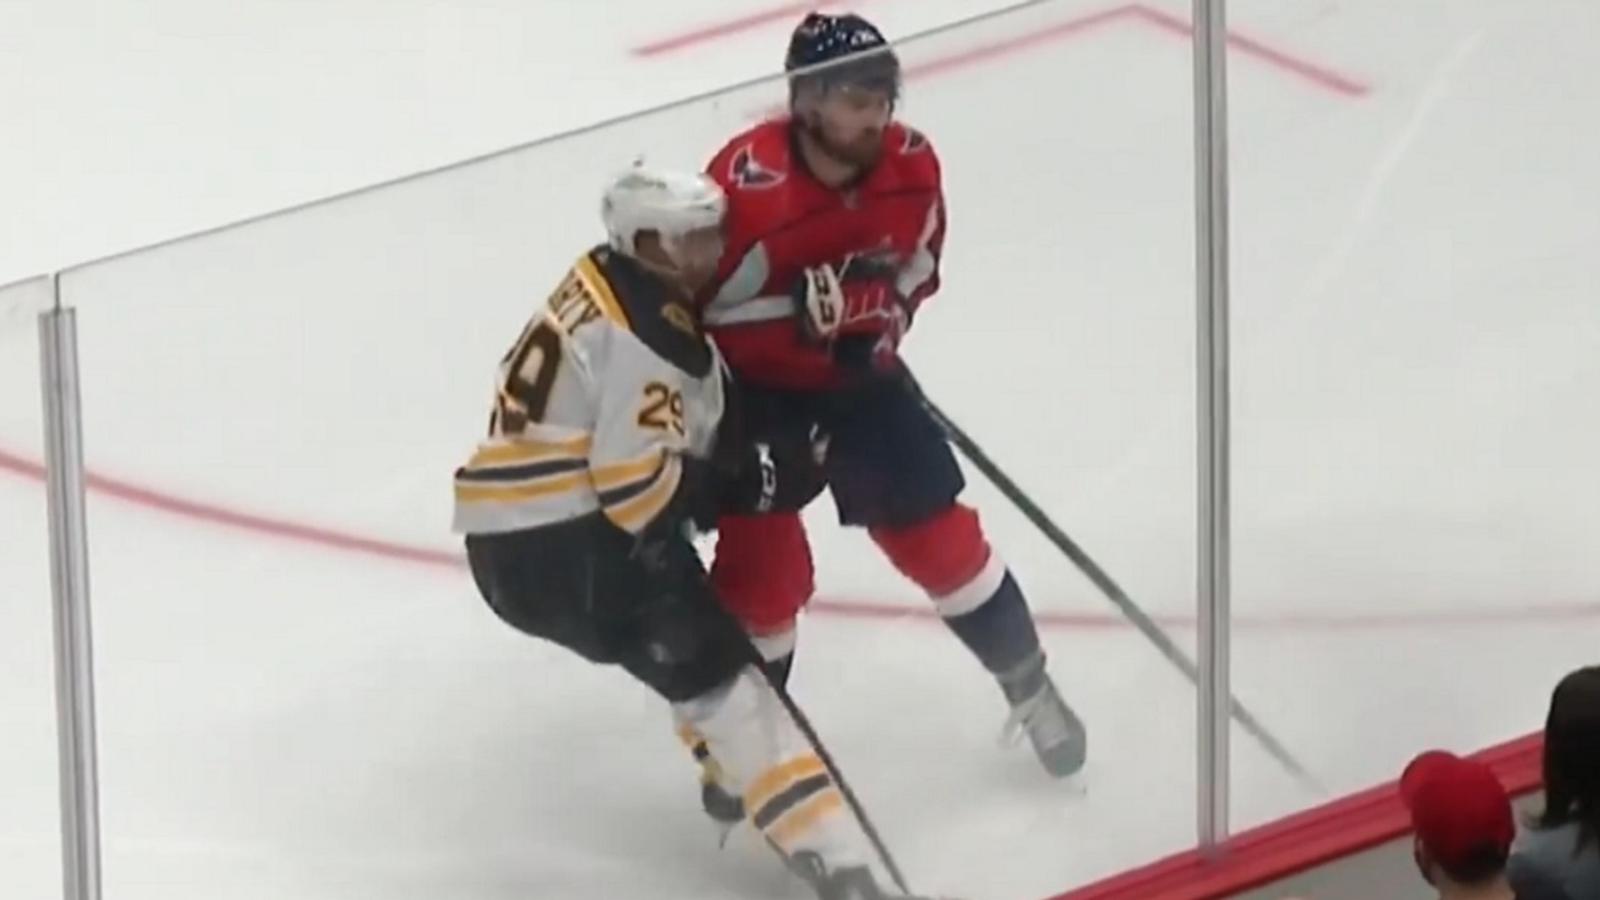 Dylan McIlrath takes out Steven Fogarty with a blatant head shot.